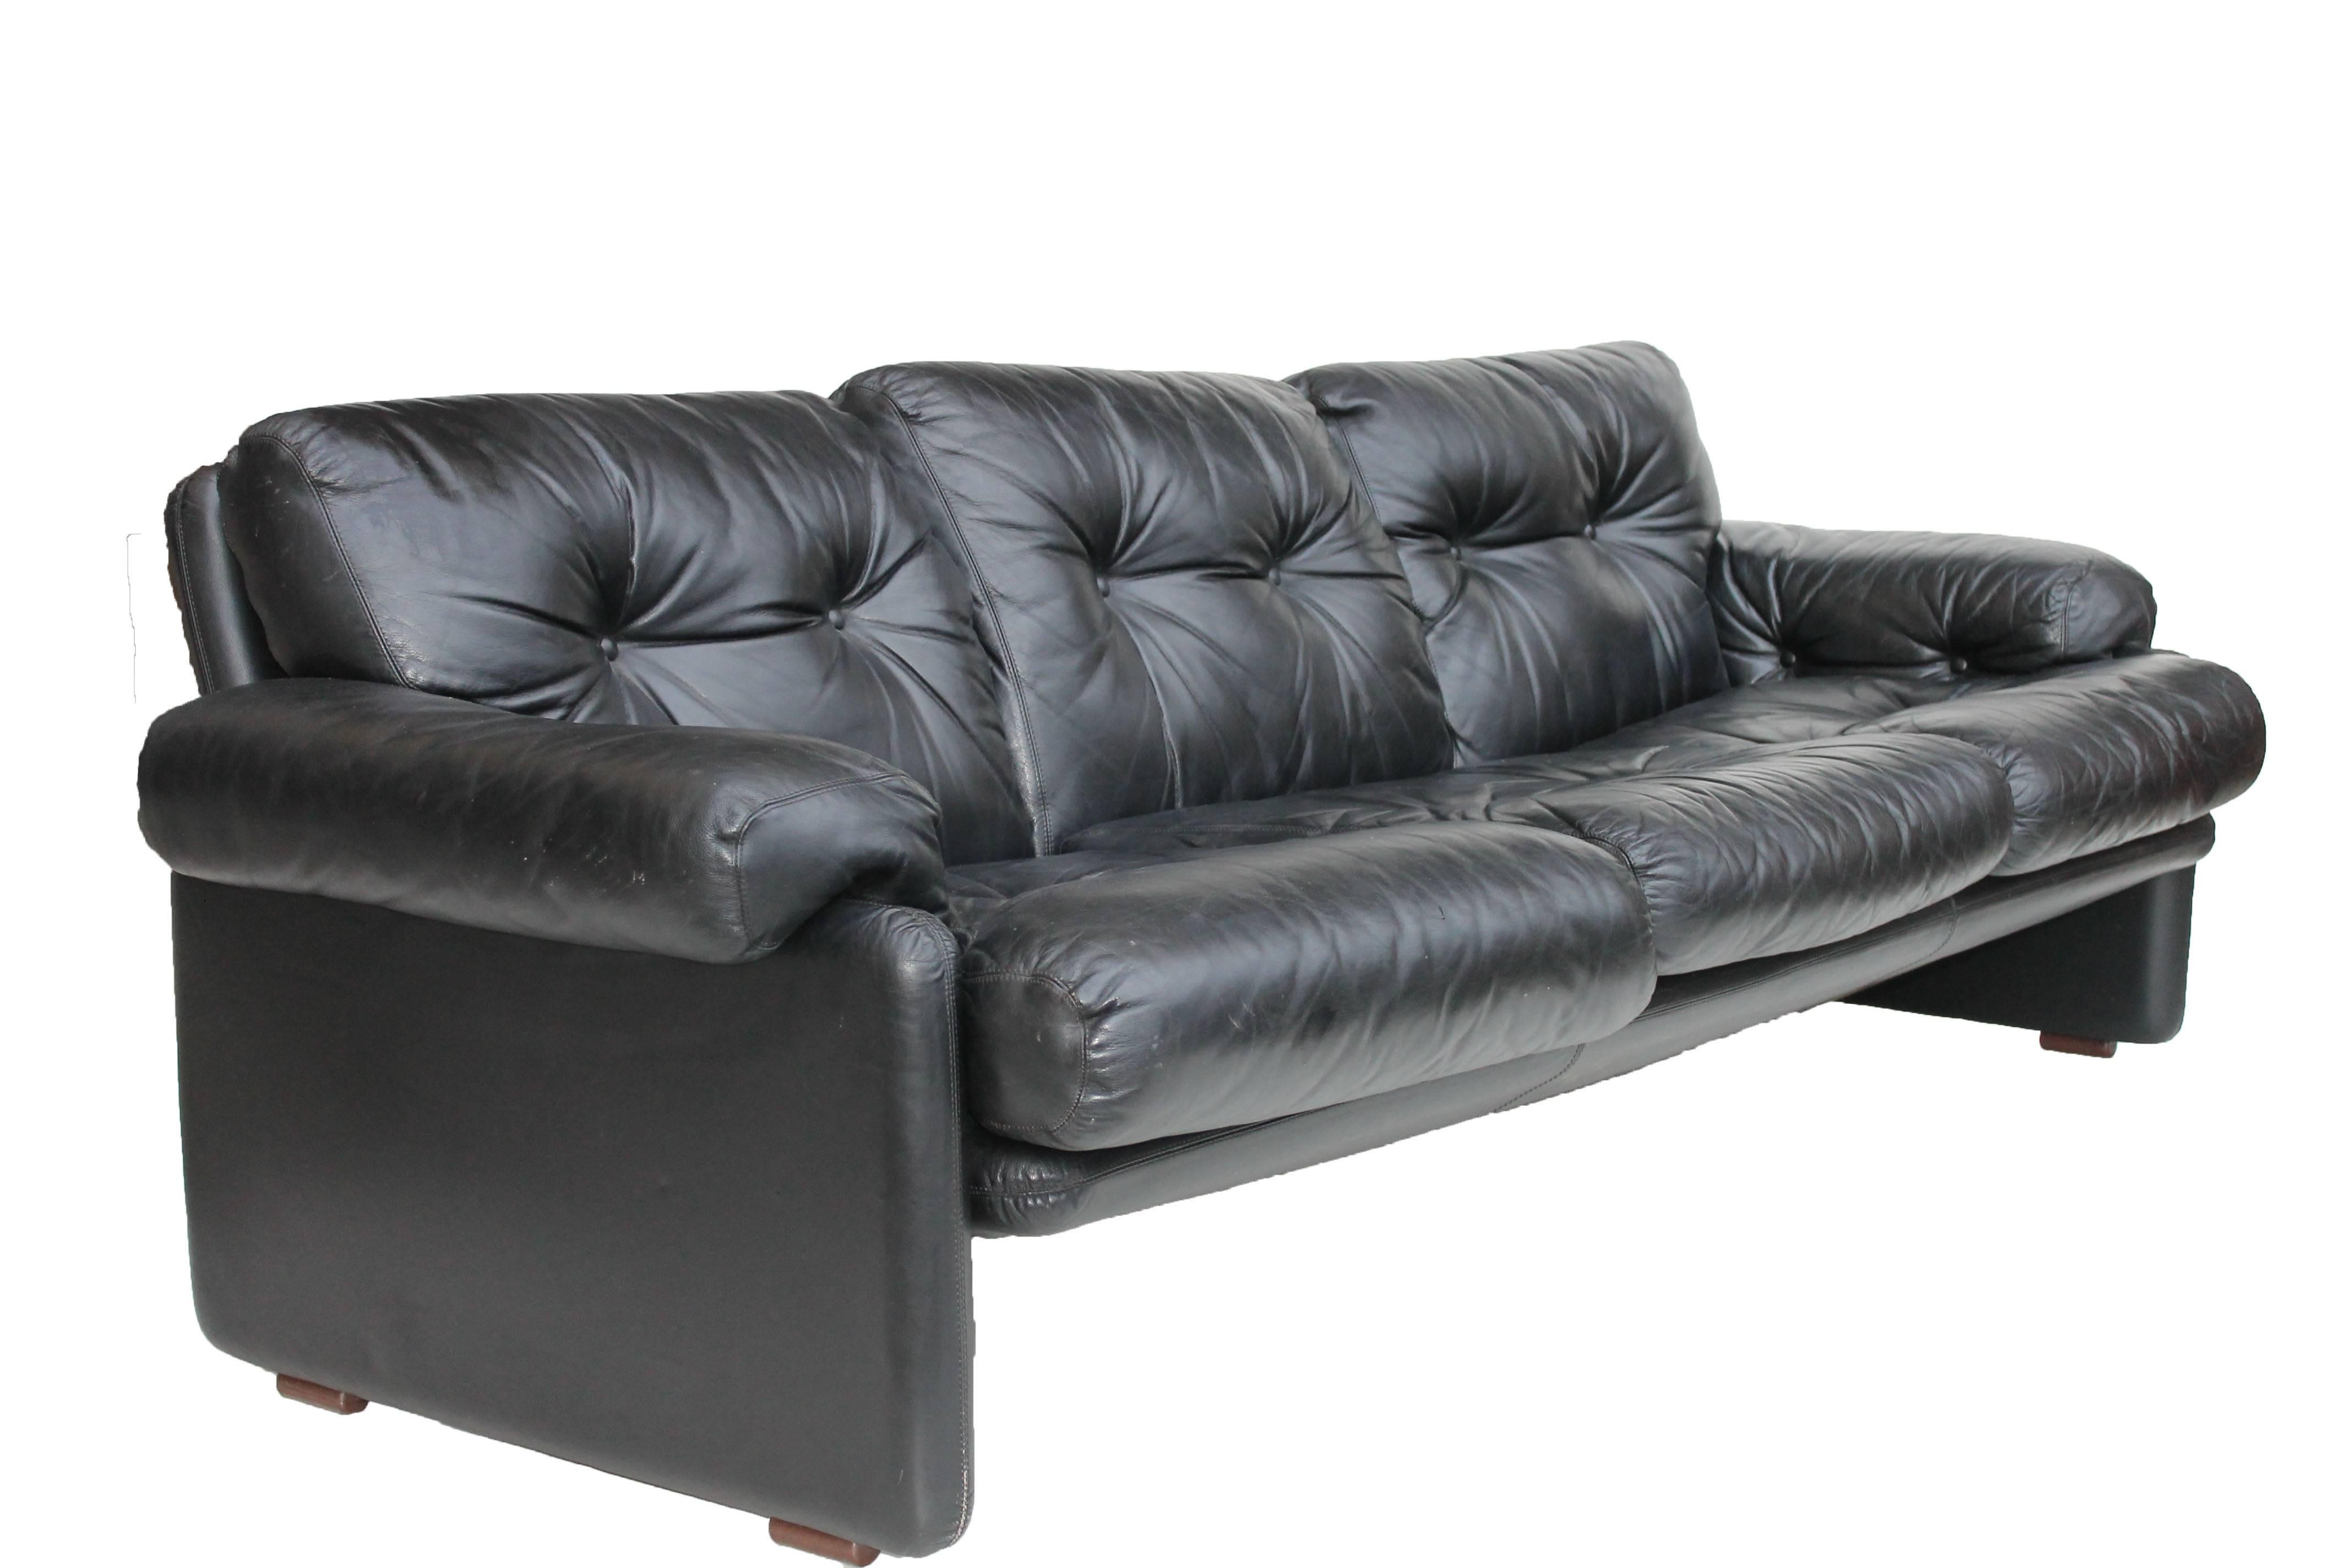 Coronado sofa designed by Tobia Scarpa for B&B Italia. The project is dated 1966. Black leather, great condition.
   